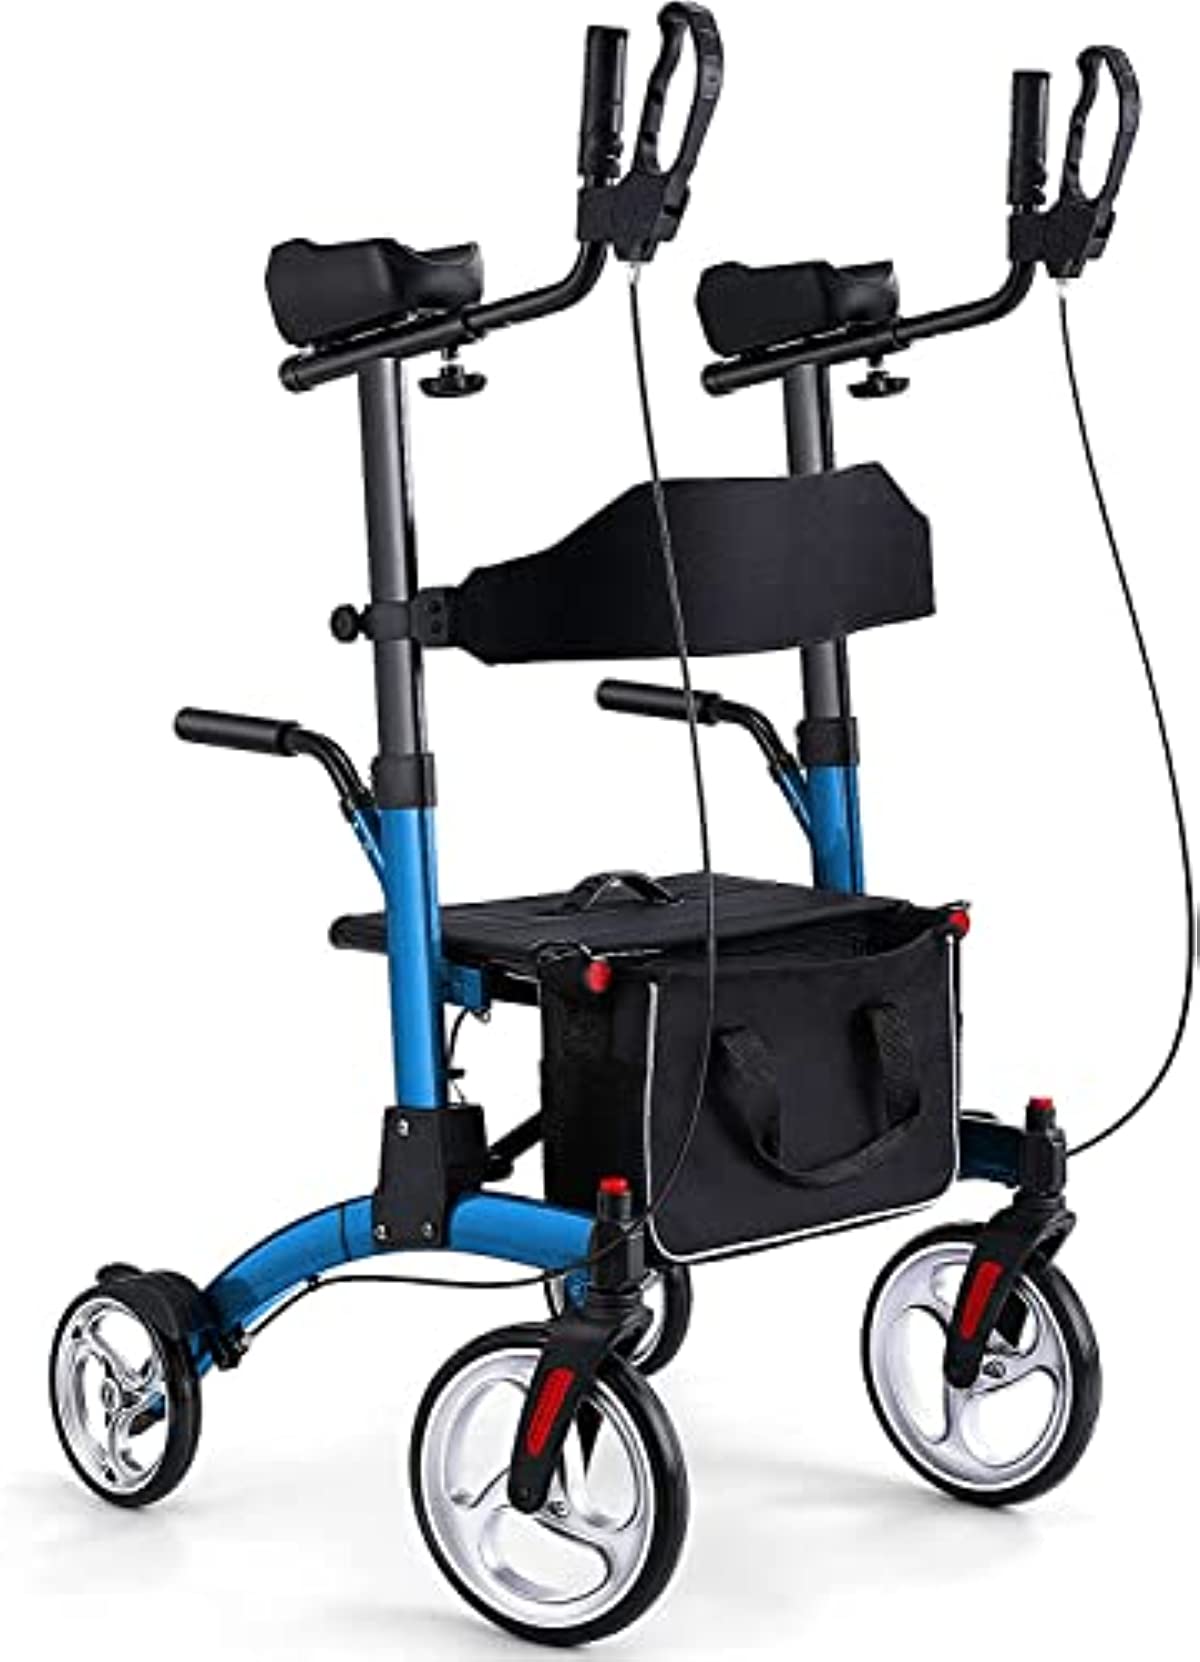 Healconnex Upright Rollator Walkers for Seniors- Stand up Rolling Walker with Seats and 10\" Wheels, Padded Armrest and Backrest,Tall Rolling Mobility Aid with Basket, Foam Handle to Stand up Blue